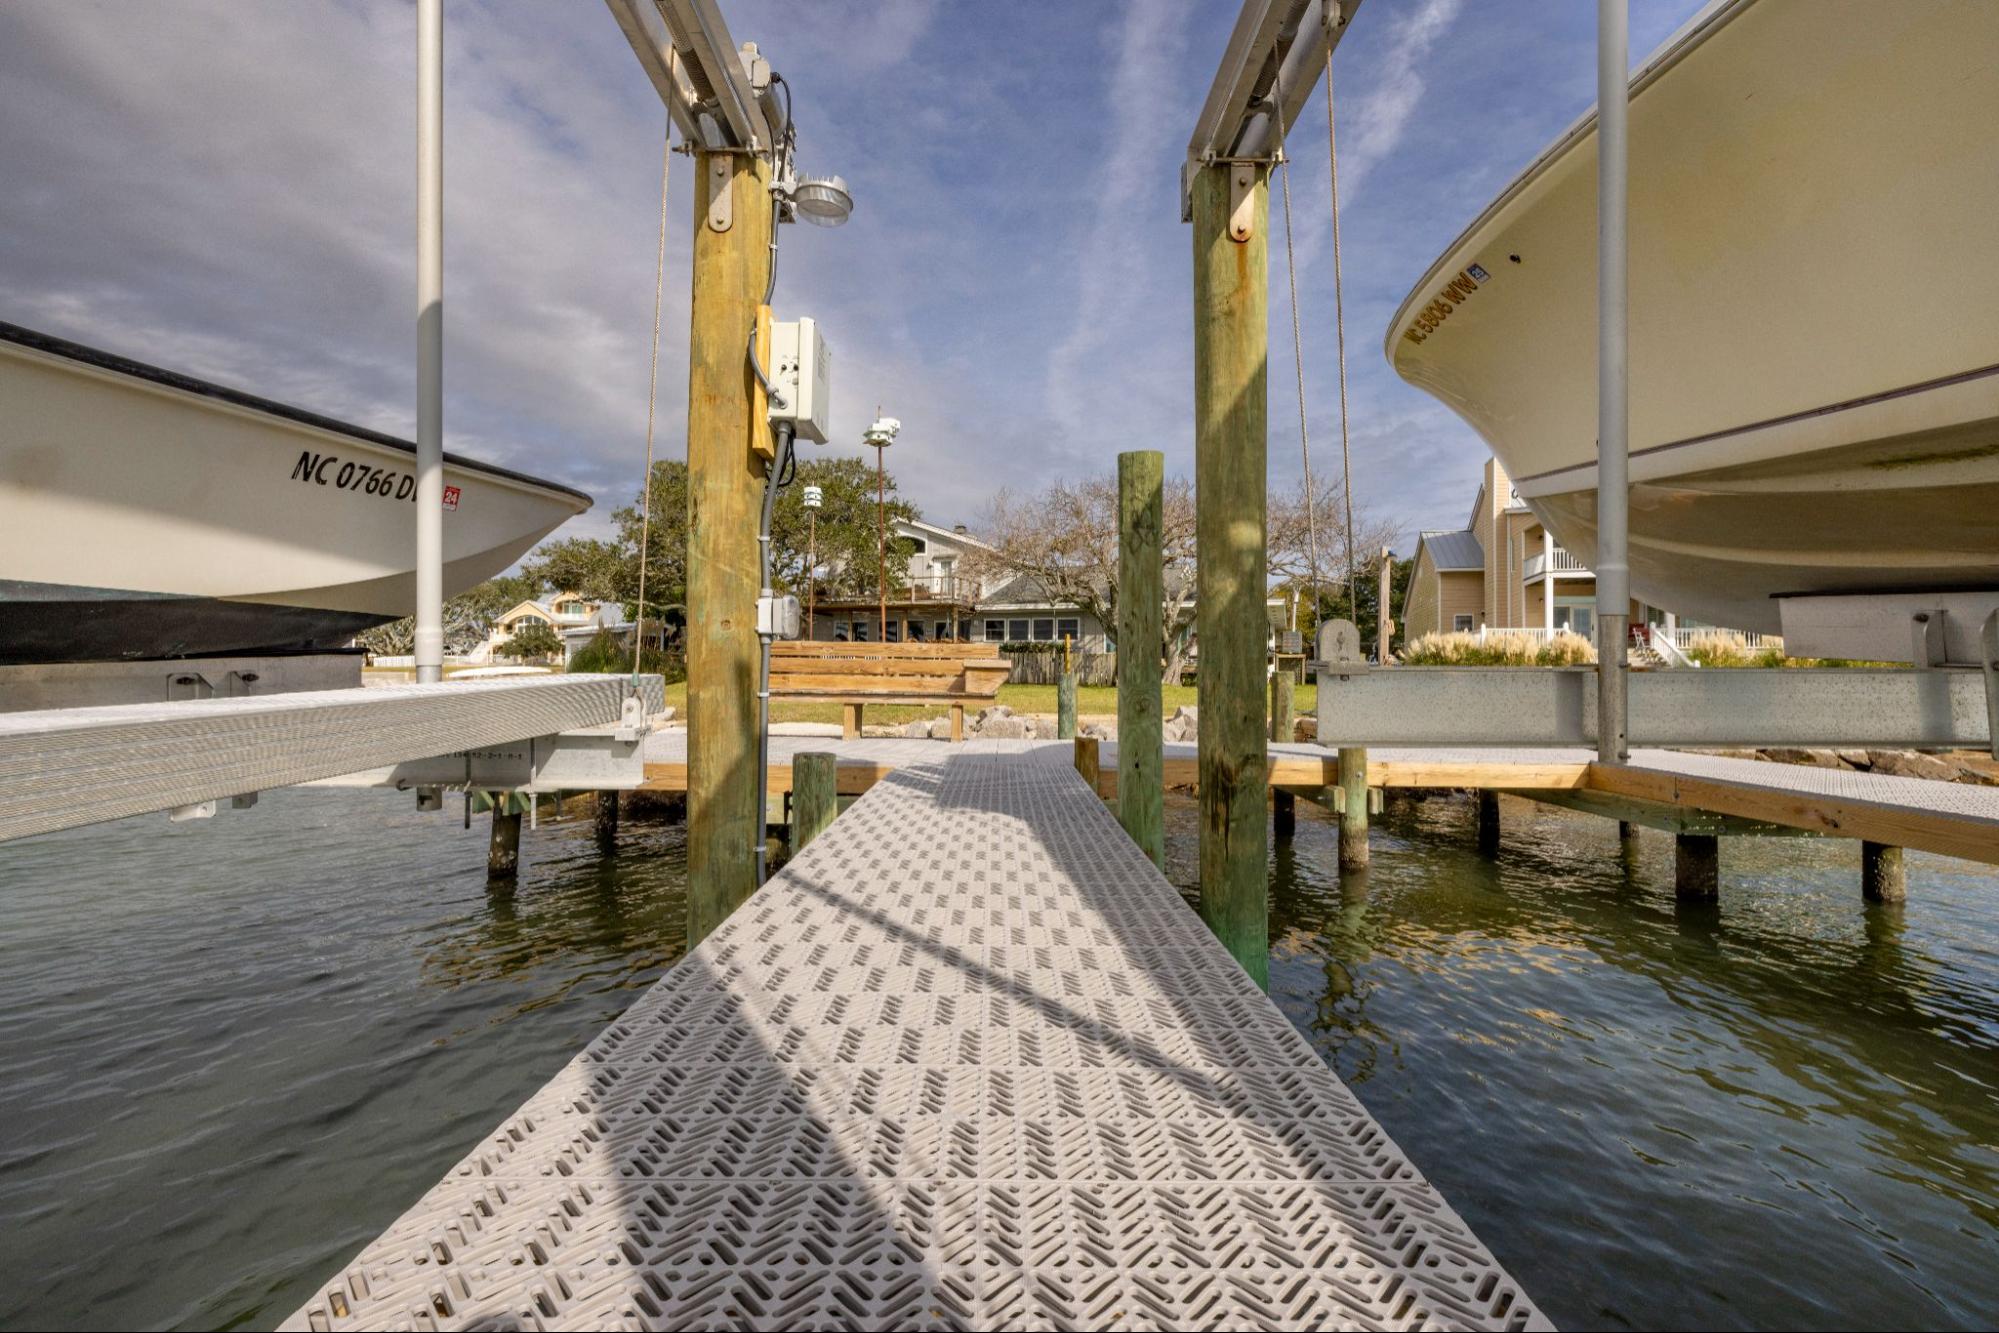 This image is from the perspective of standing on the end of a dock towards a bench and a house in the distance. There are two raised boats surrounding the dock, above the water.